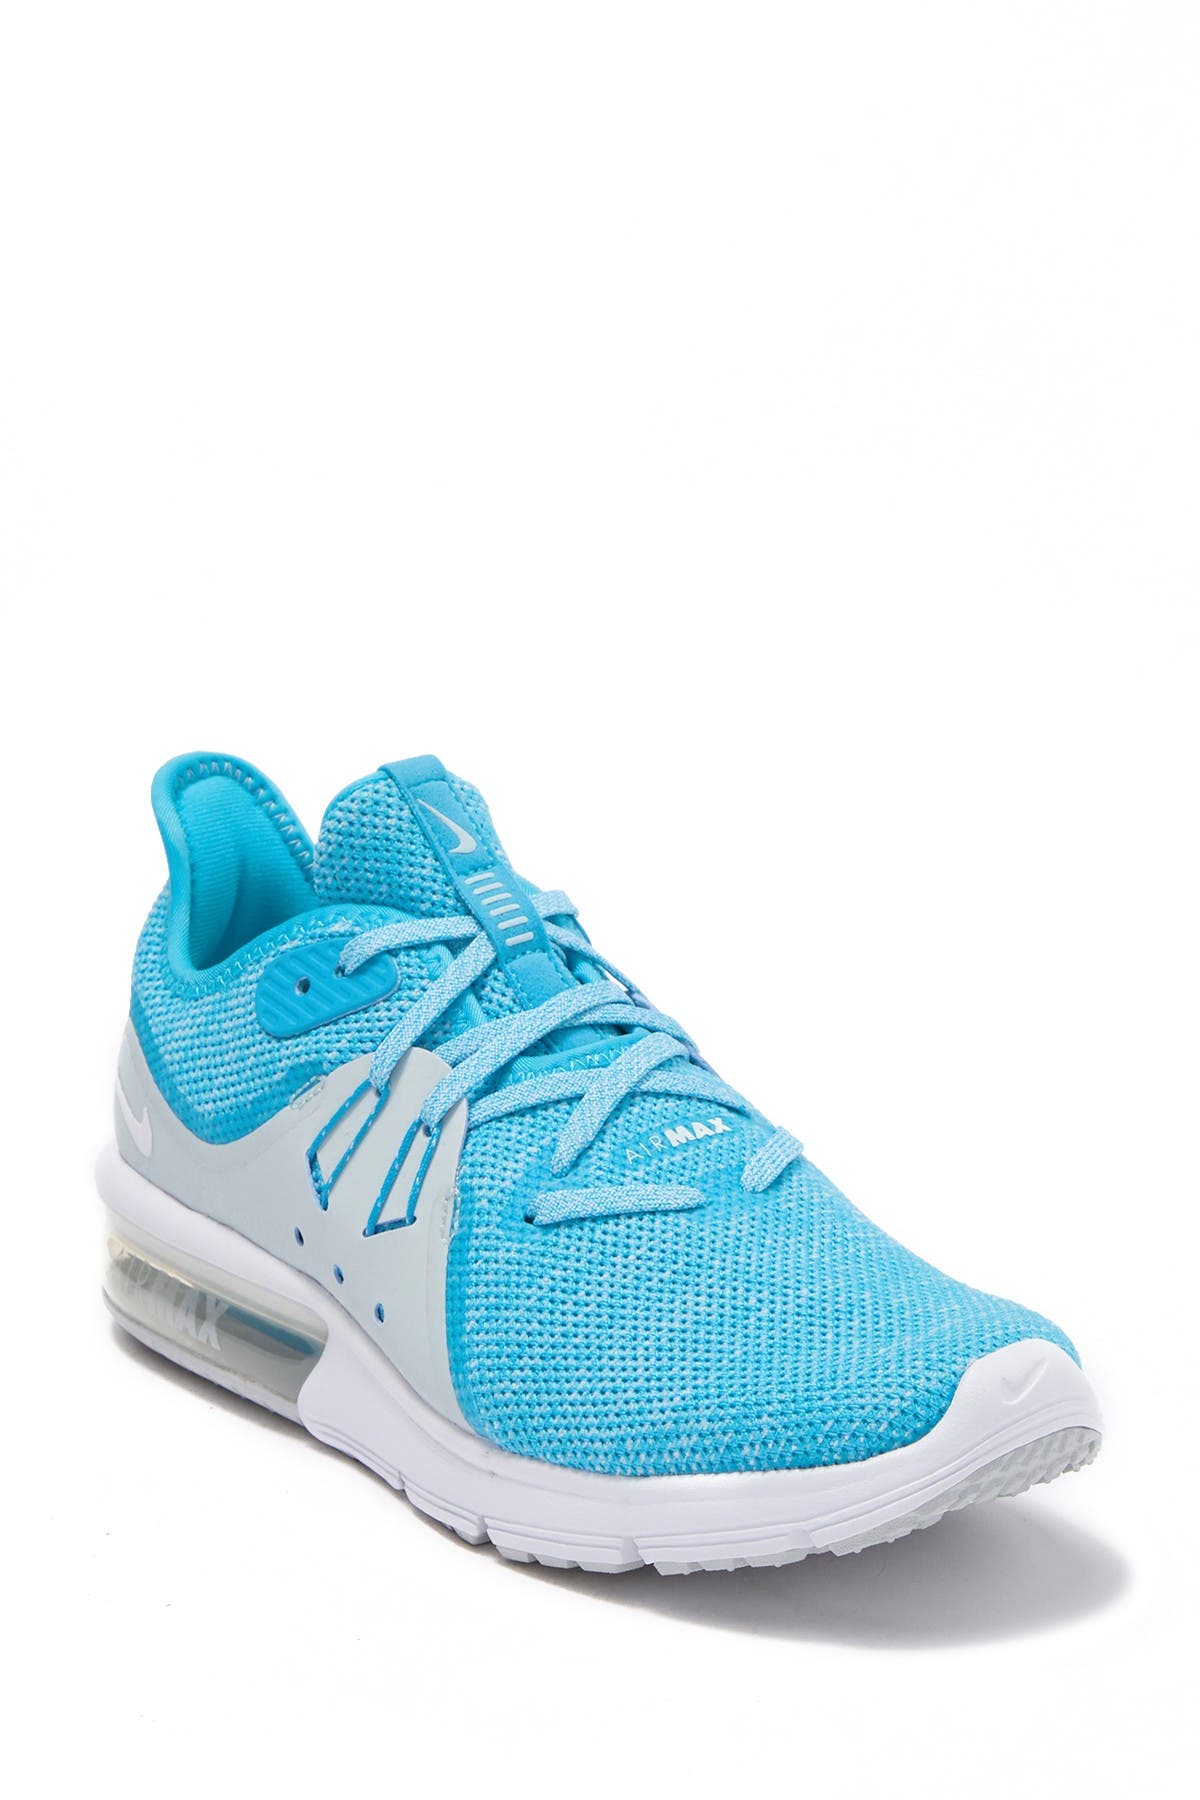 air max sequent sneaker